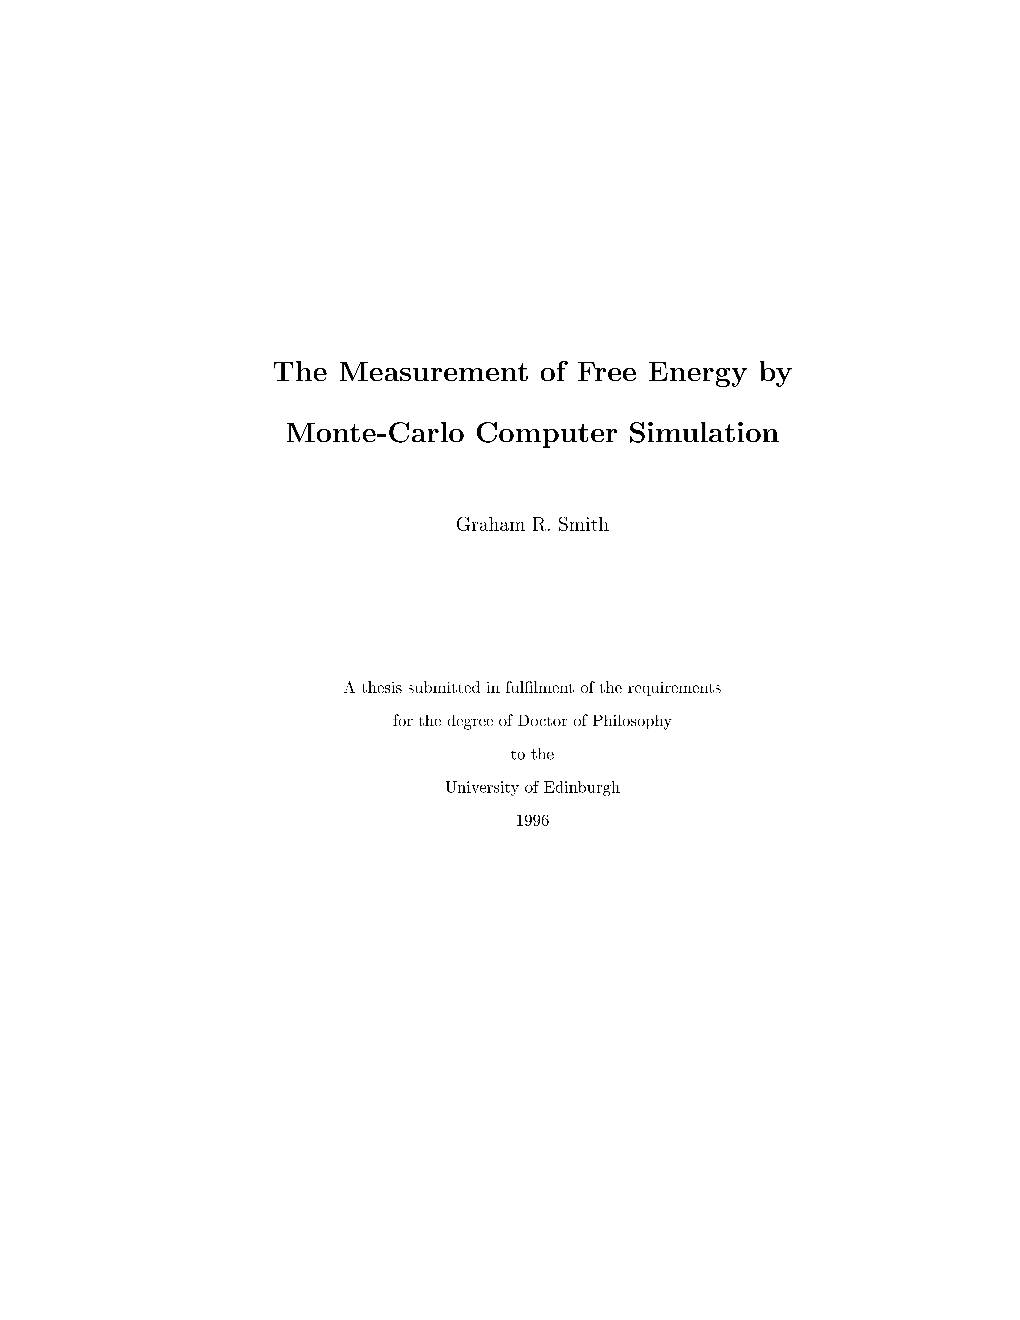 The Measurement of Free Energy by Monte-Carlo Computer Simulation